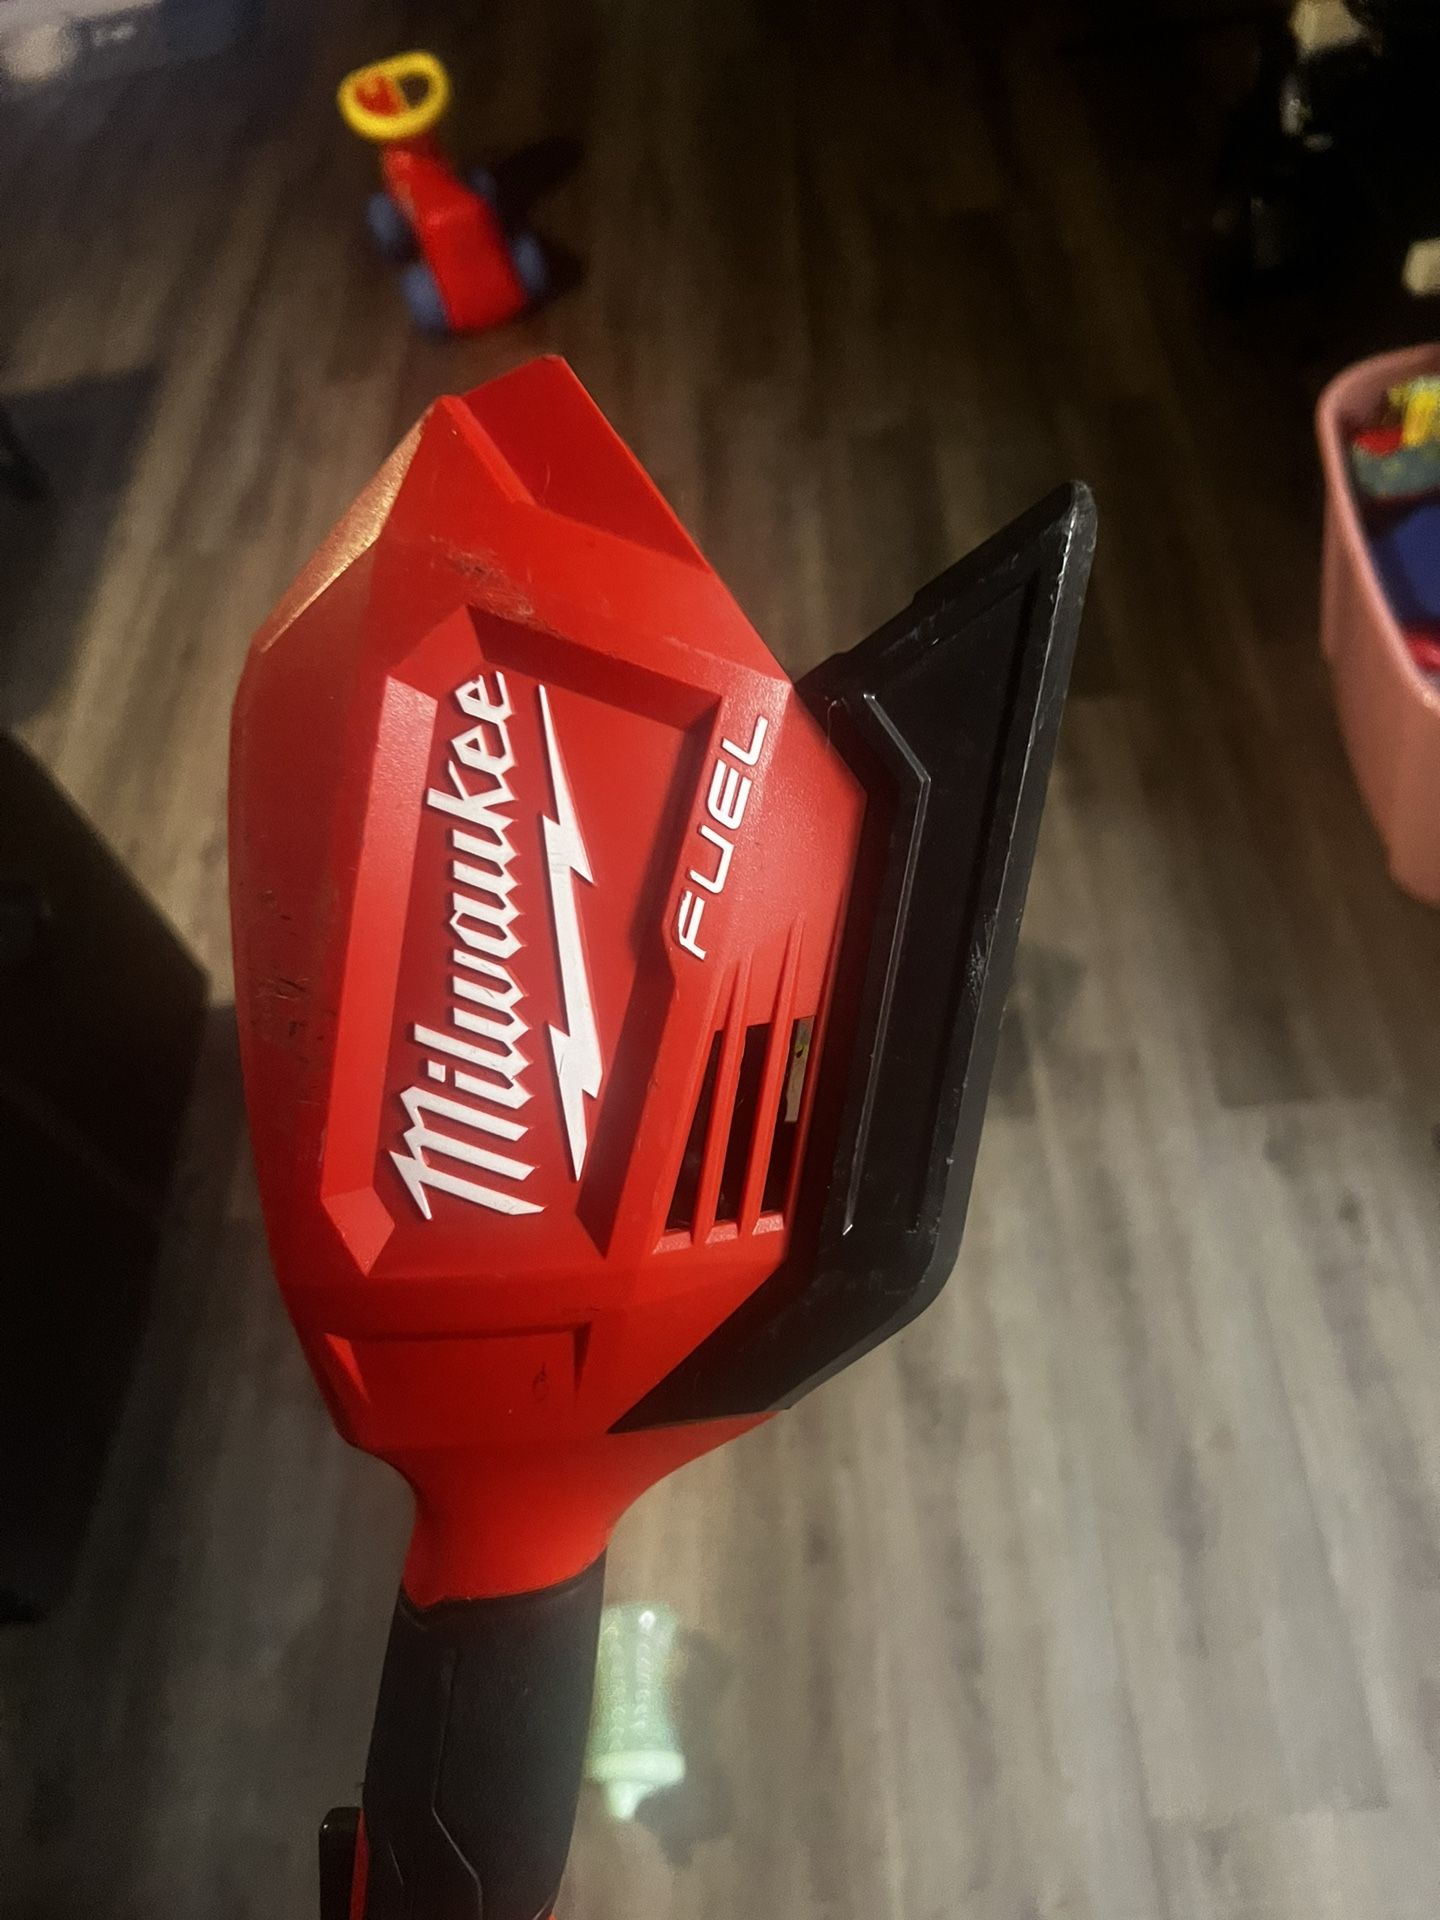 Milwaukee 18v Weed Eater And Hammer Drill